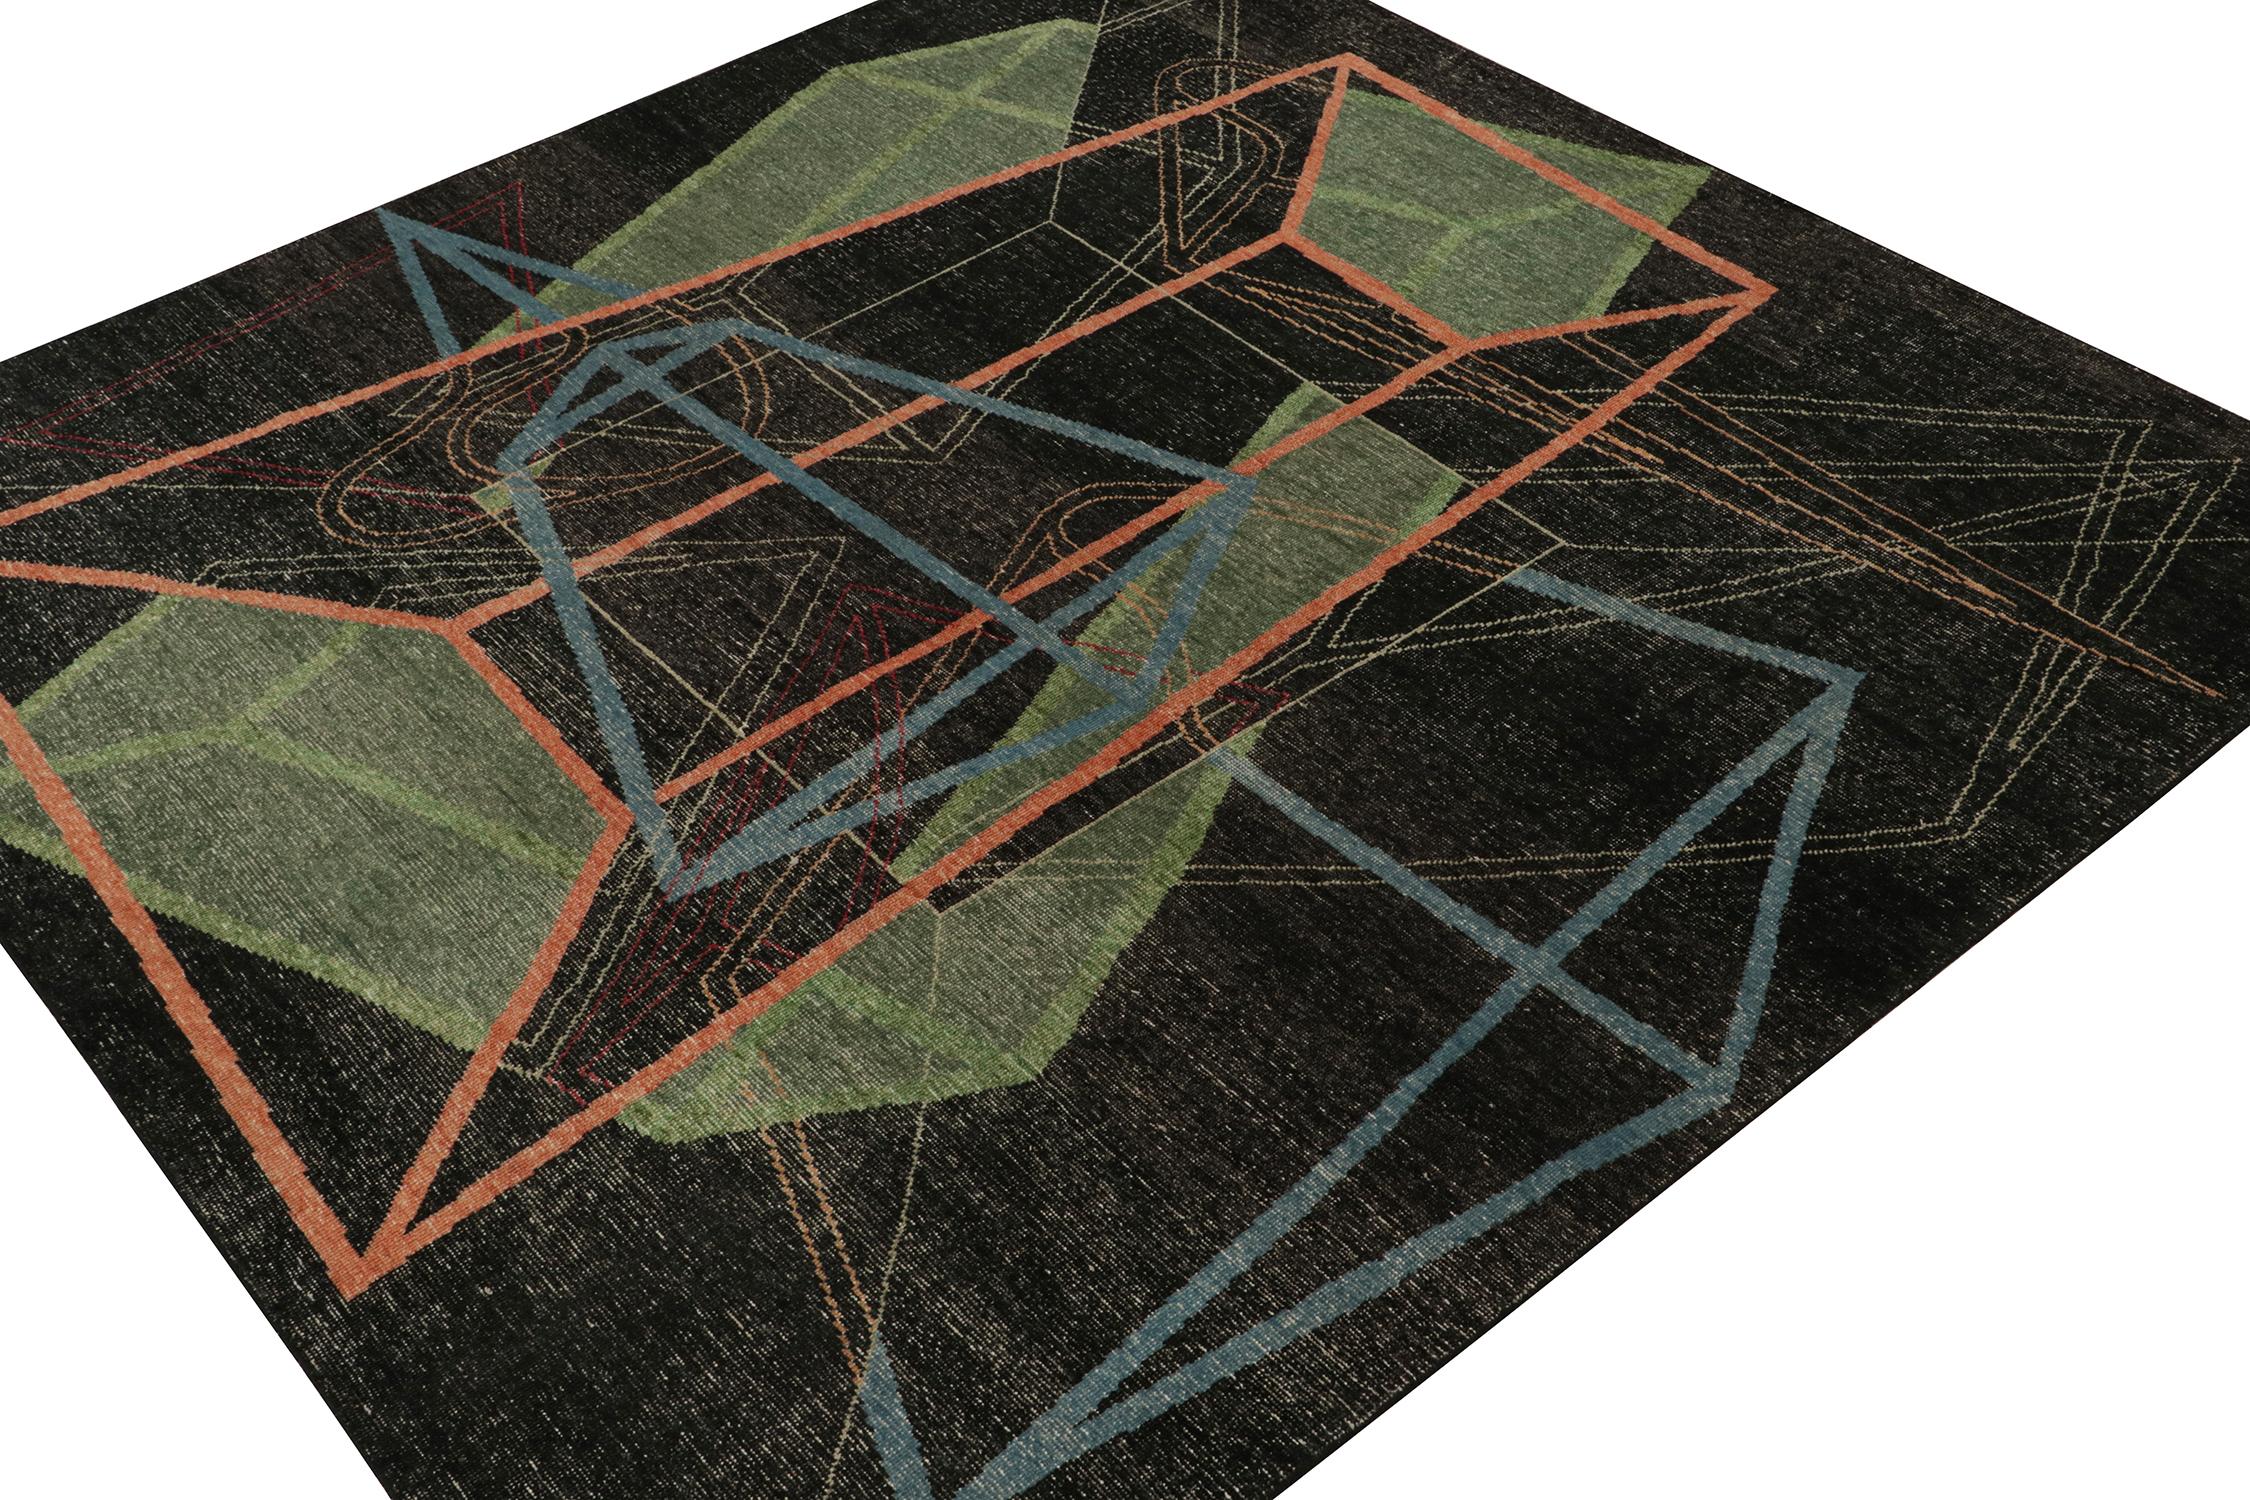 This square 9x9 rug is a bold new addition to Rug & Kilim’s Homage Collection. Hand-knotted in wool and cotton, this particular rug recaptures fabulous Art Deco aesthetics in a Rustic Modern fashion. 

Further On the Design:

One can't help but